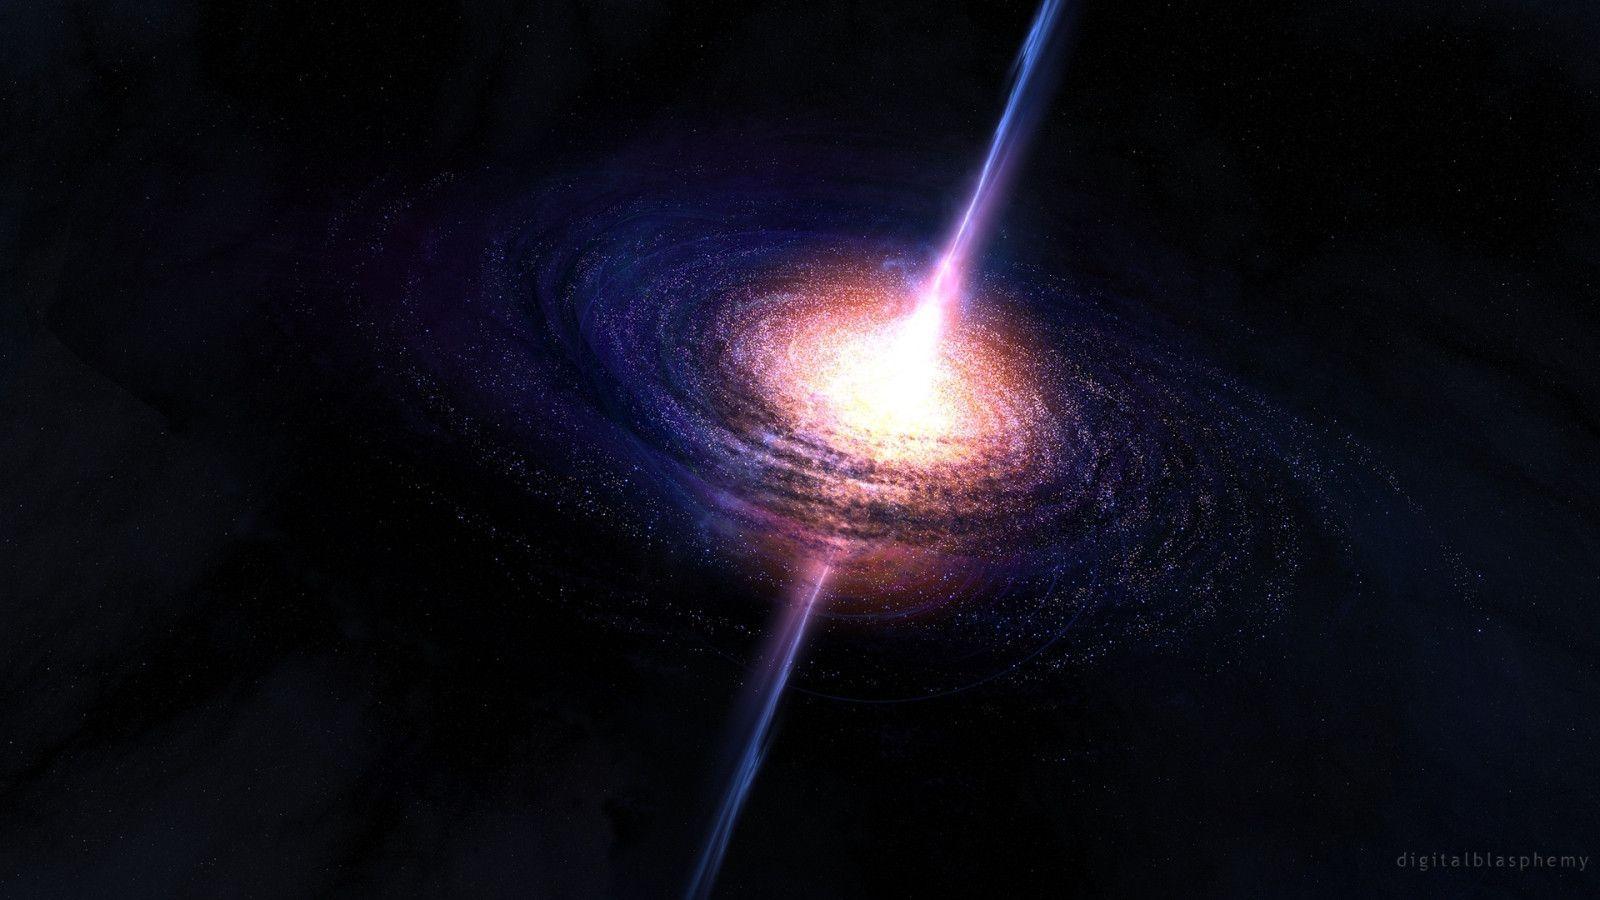 Black Hole Wallpaper Cool Picture Galaxy Wallpaper of Black Hole